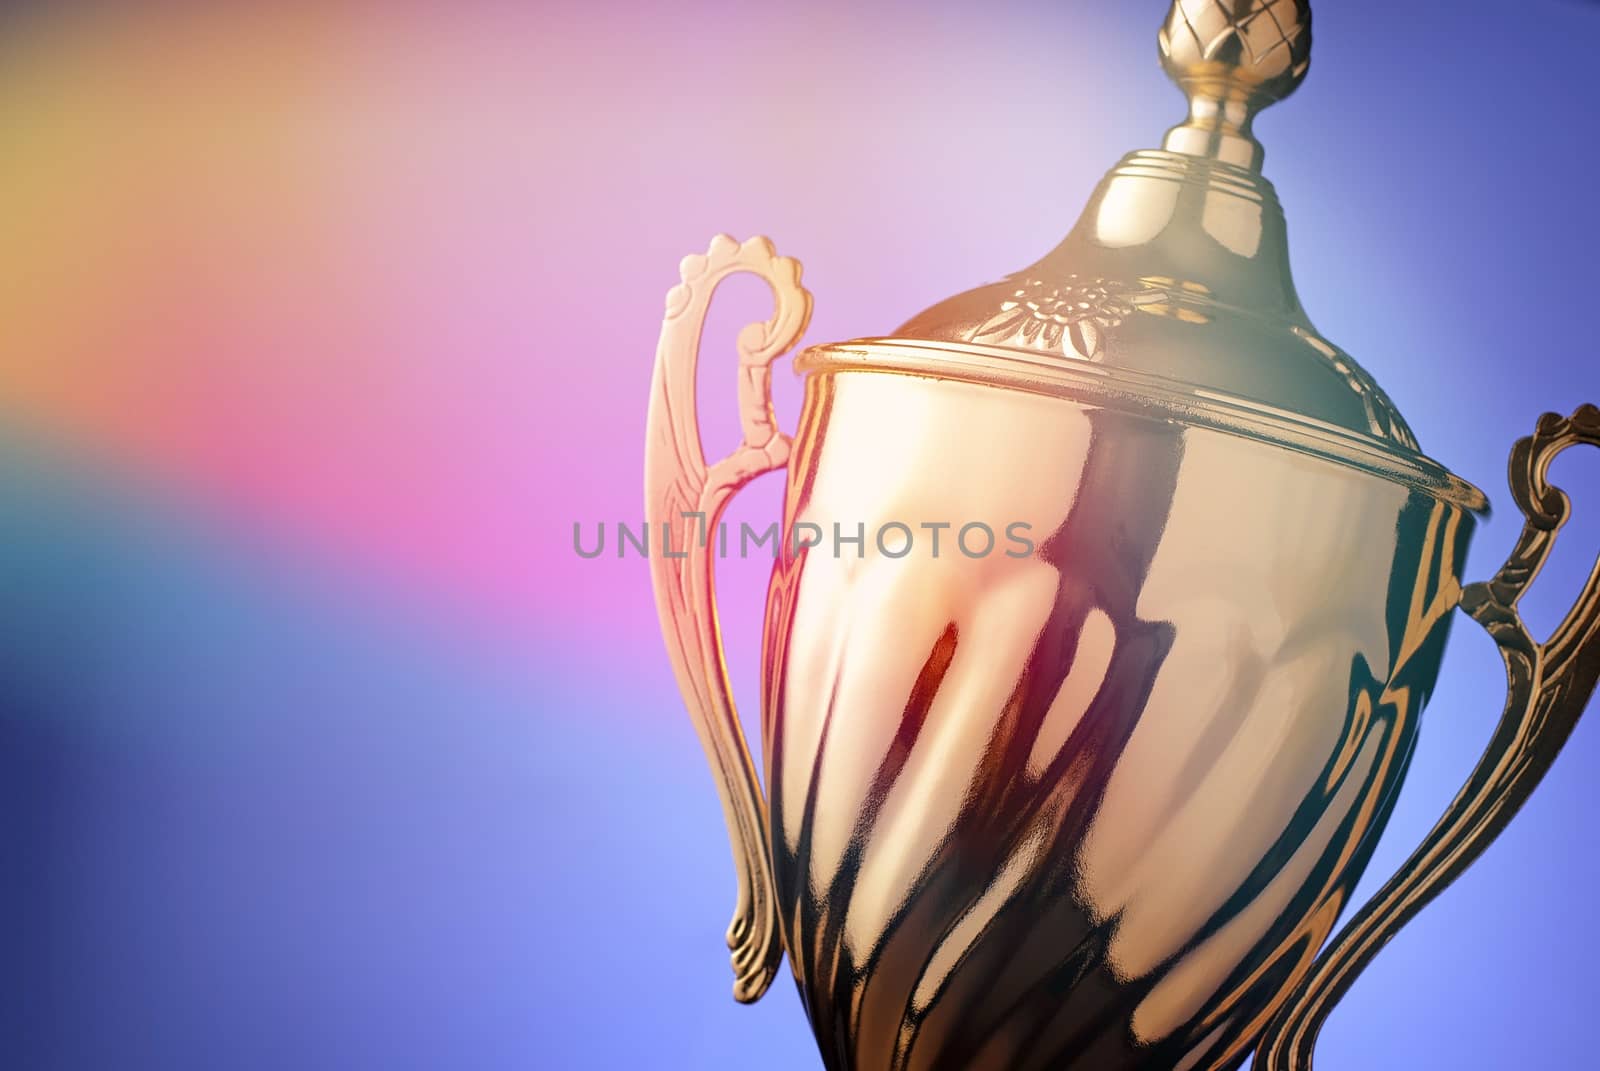 Close up of a silver trophy prize with an ornate lid and handles for the winner of a championship event or competition on blue with copyspace